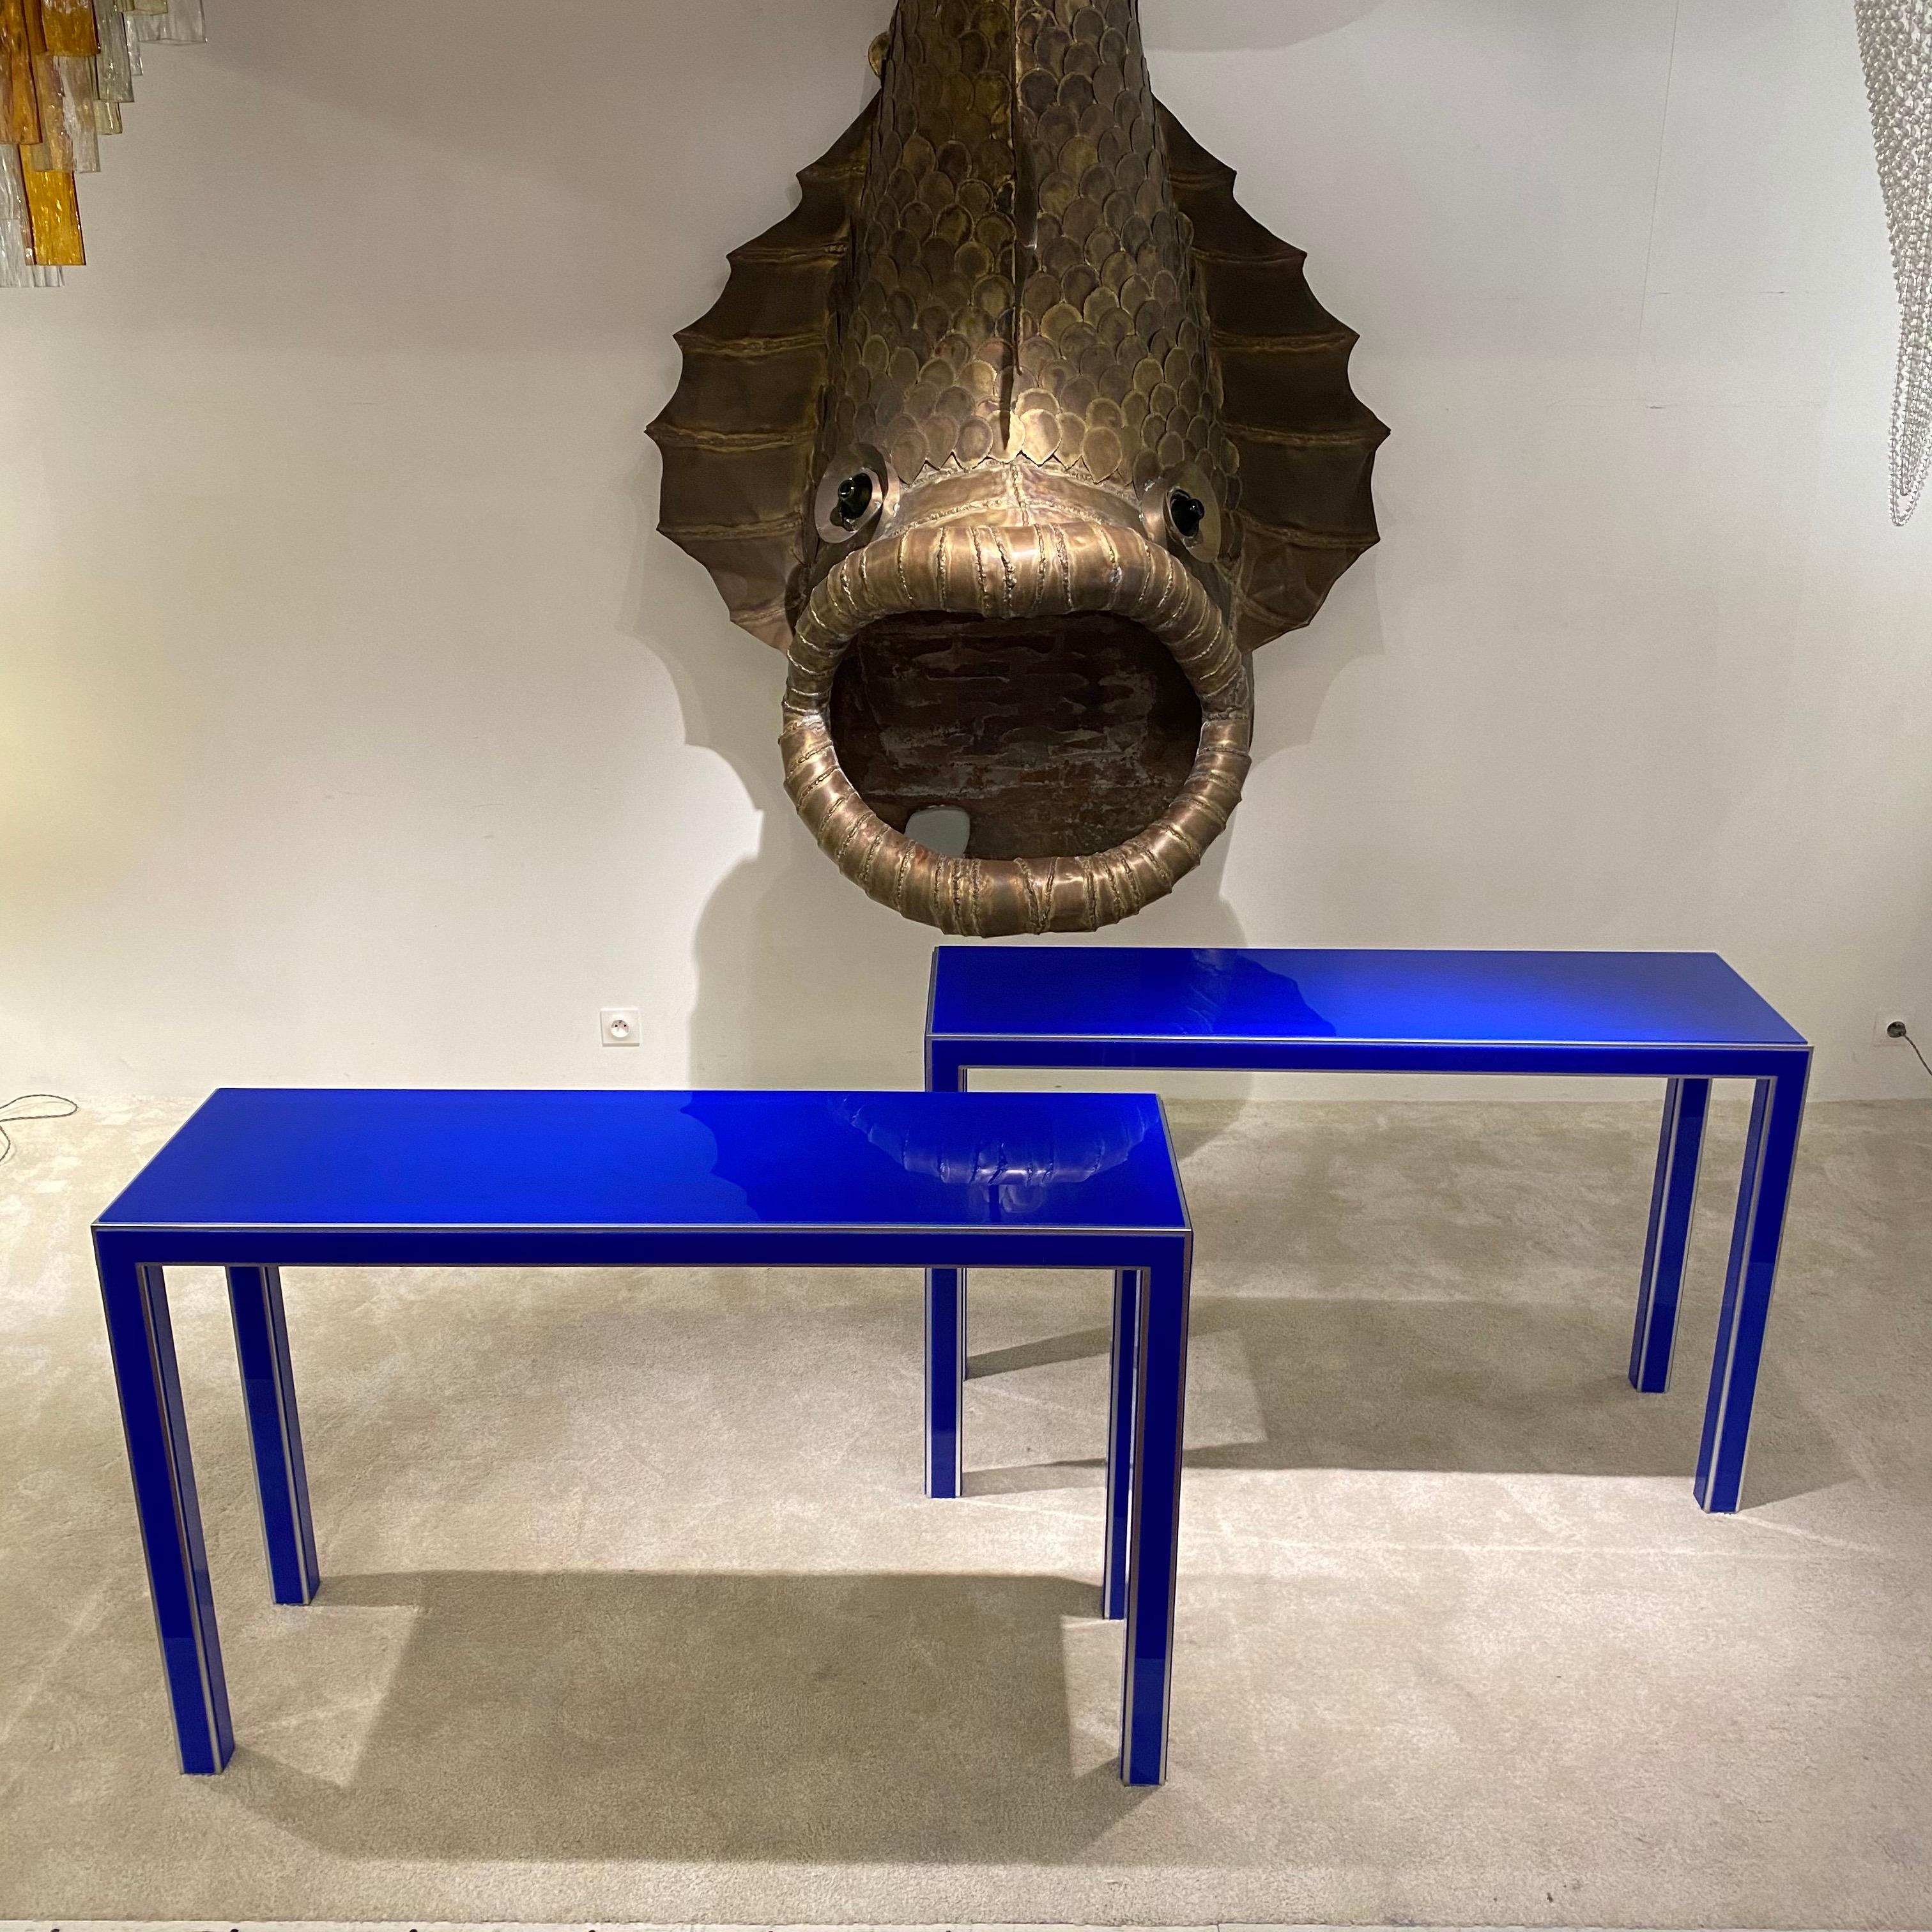 Pair of consoles by Alessandro Albrizzi (1934-1994), made of Lucite plates on aluminum structure, 1970s.
Beautiful Klein blue color.